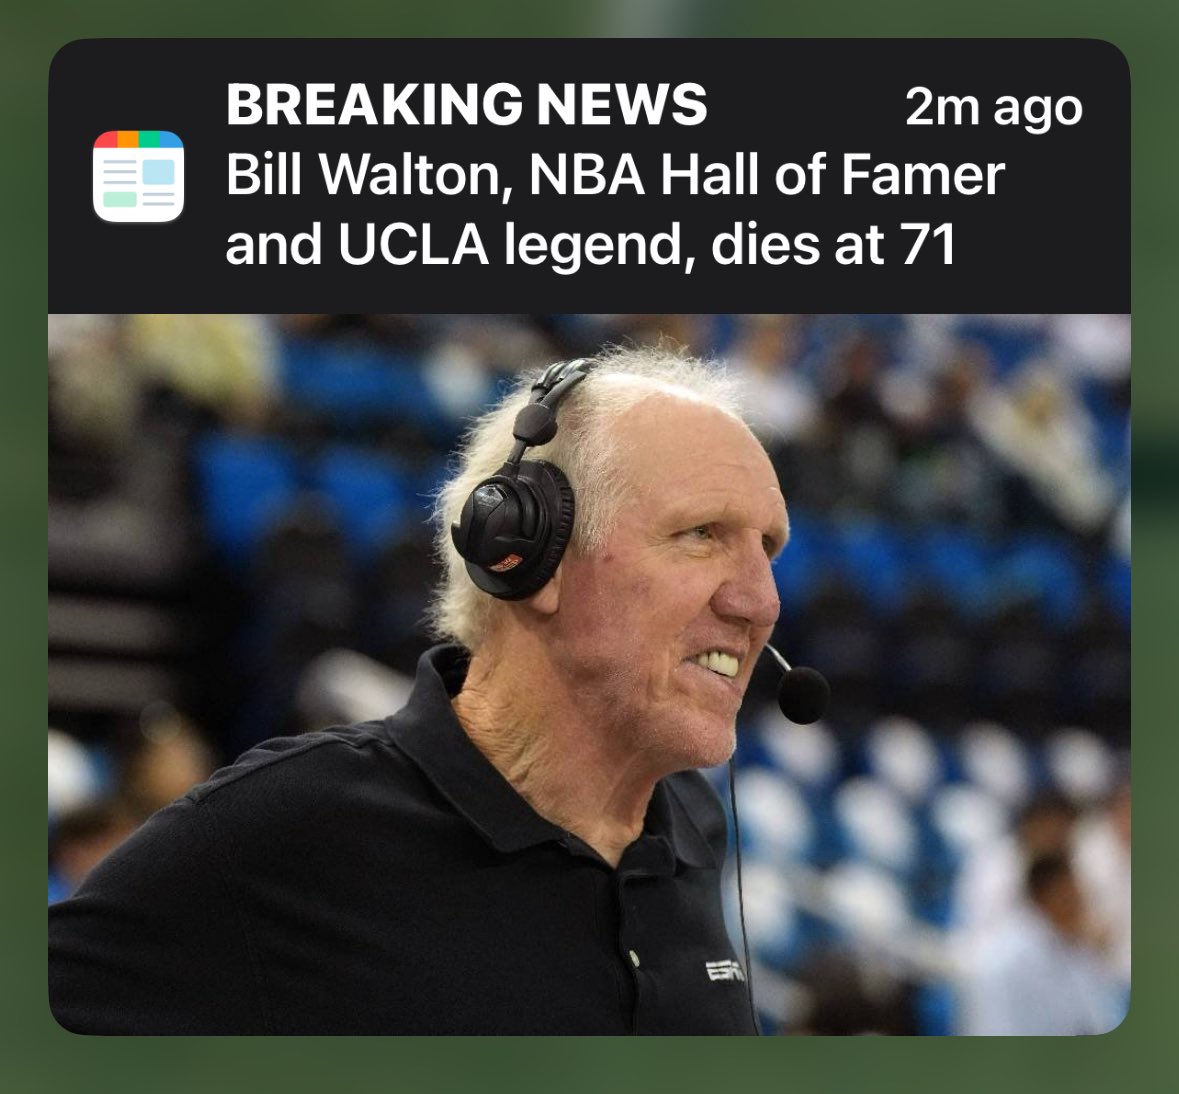 Bill Walton wanted no part of life with out his Conference of Champions @pac12